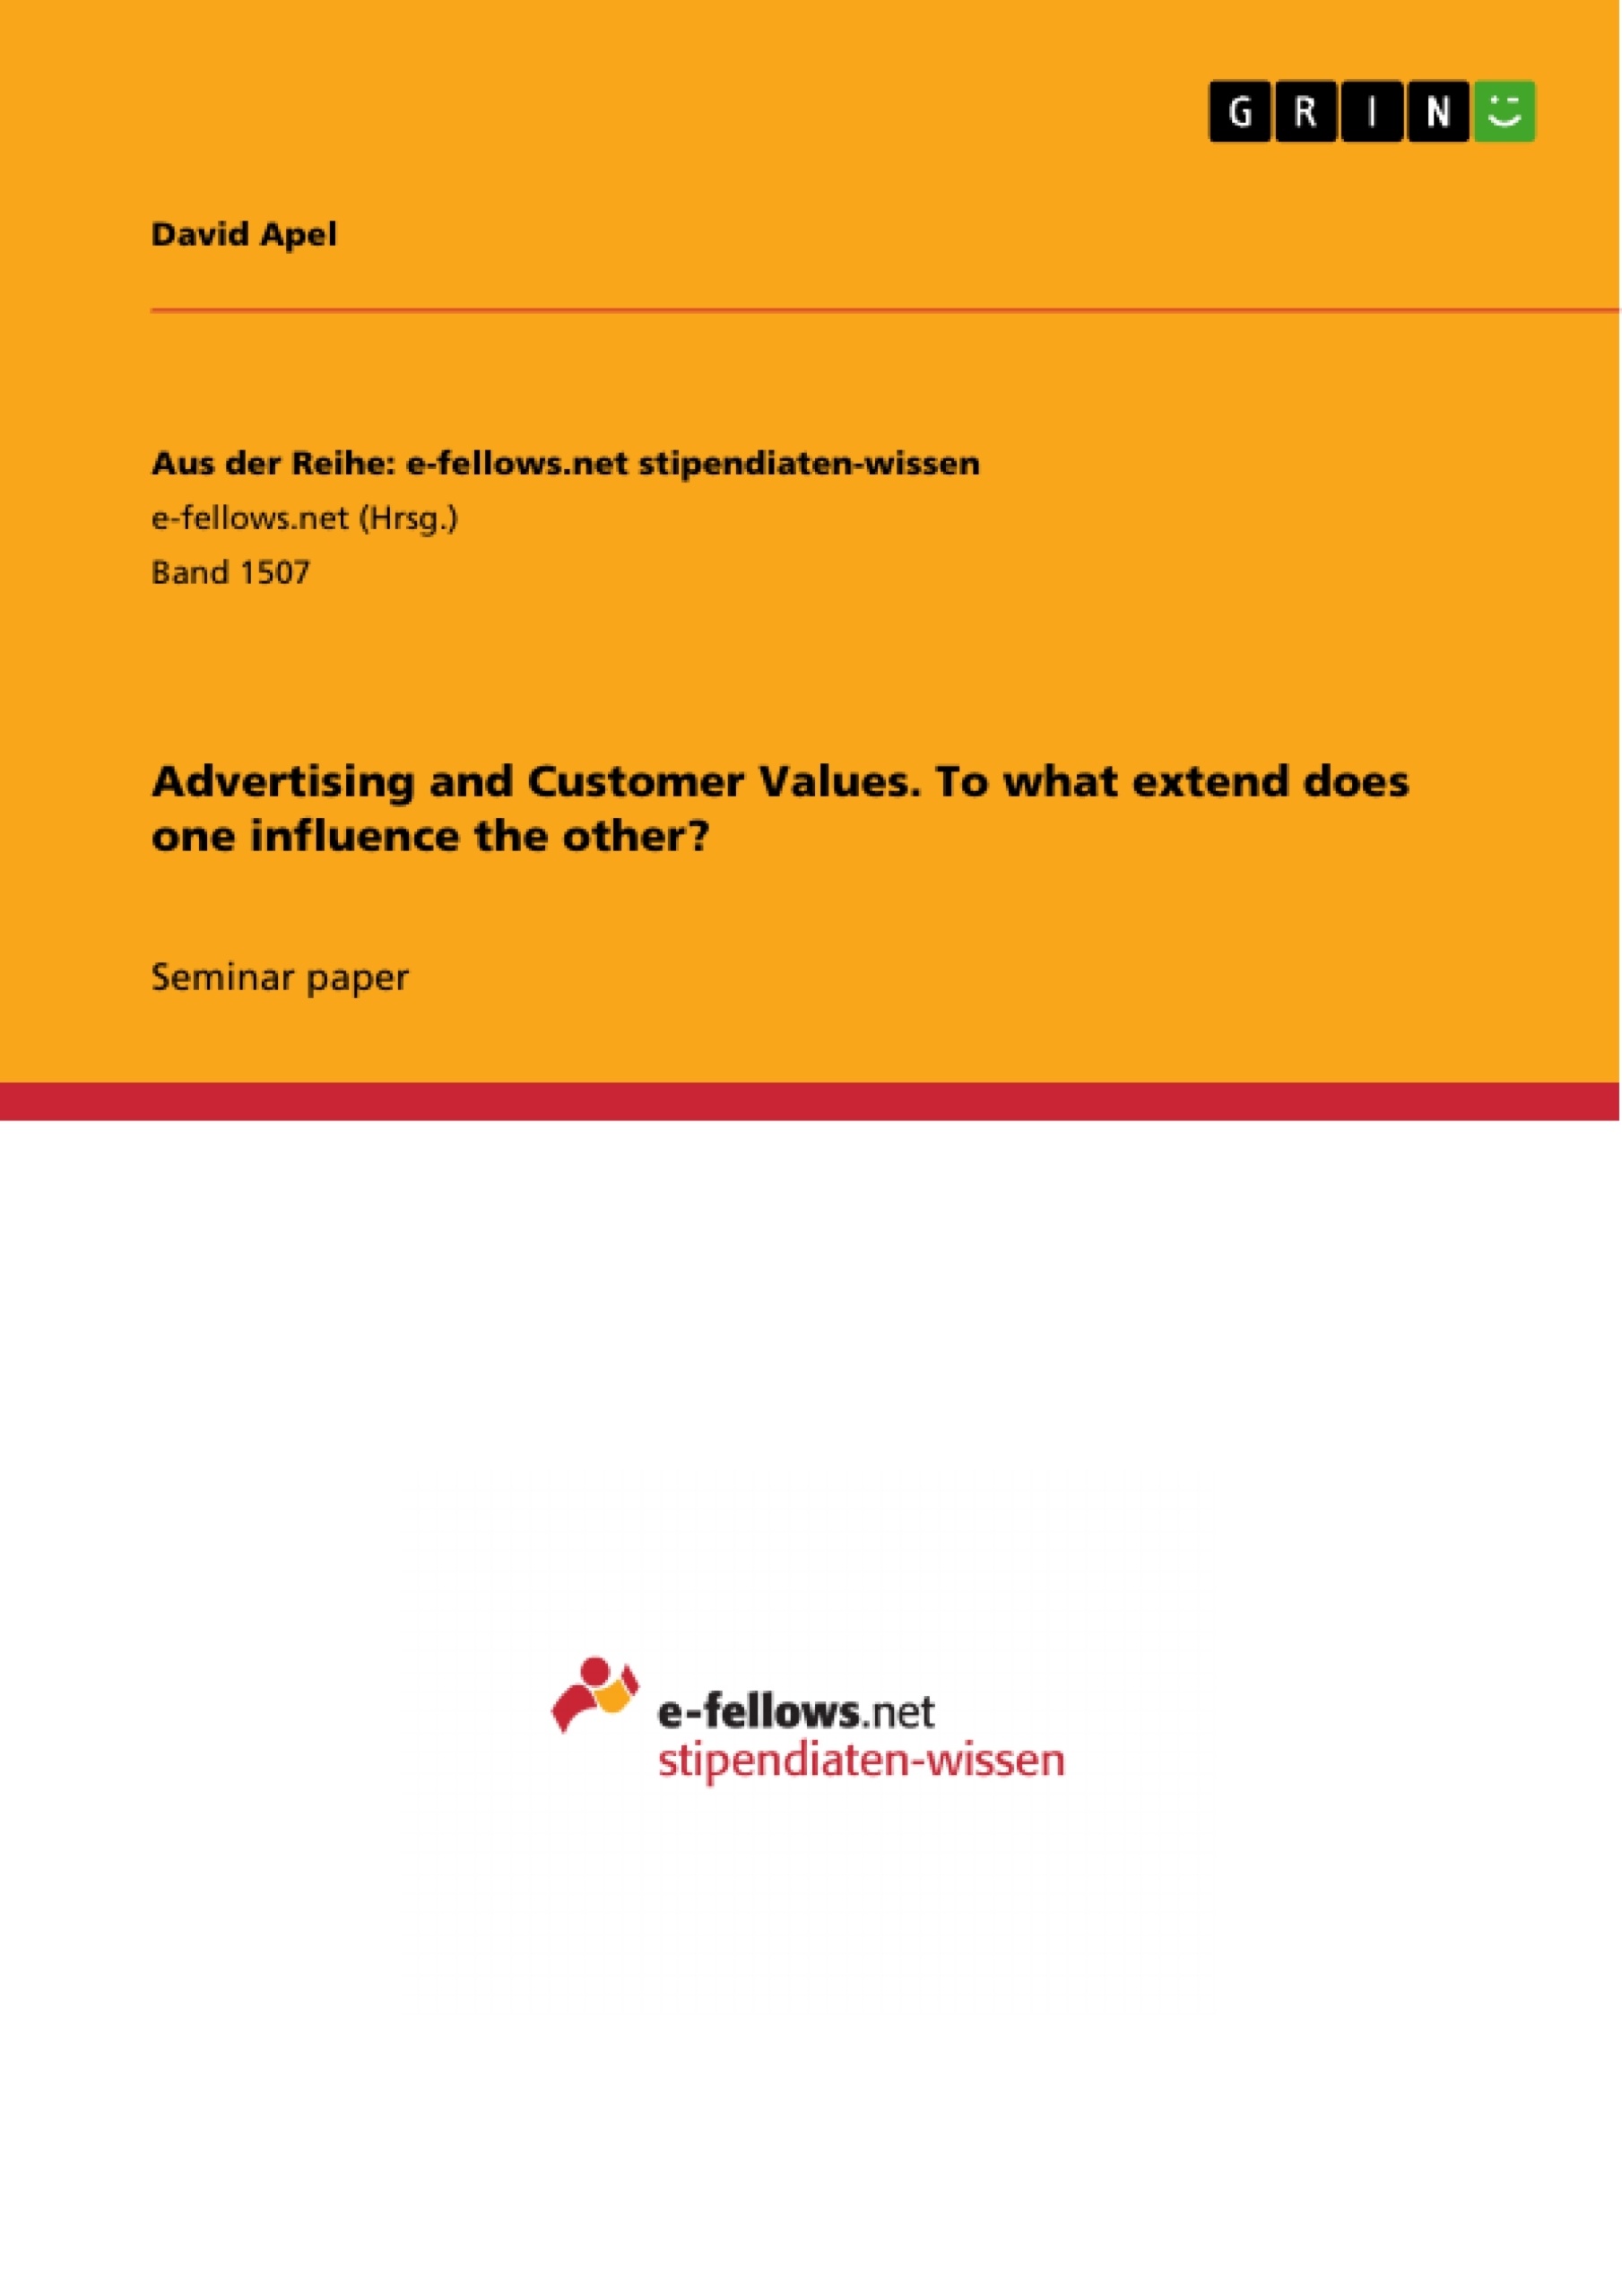 Title: Advertising and Customer Values. To what extend does one influence the other?